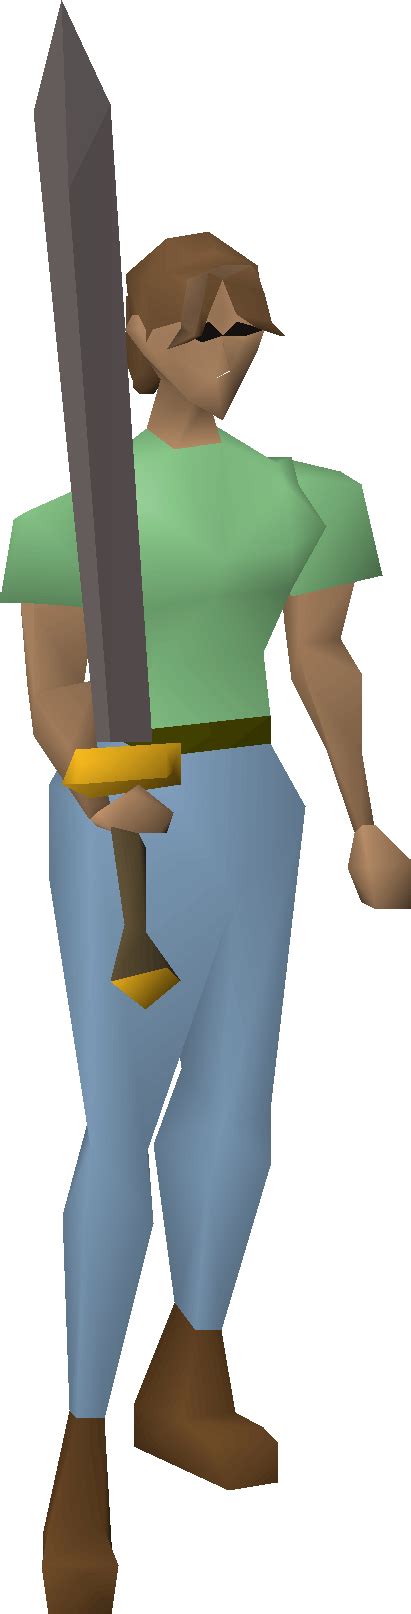 Fileiron 2h Sword Equipped Femalepng Osrs Wiki